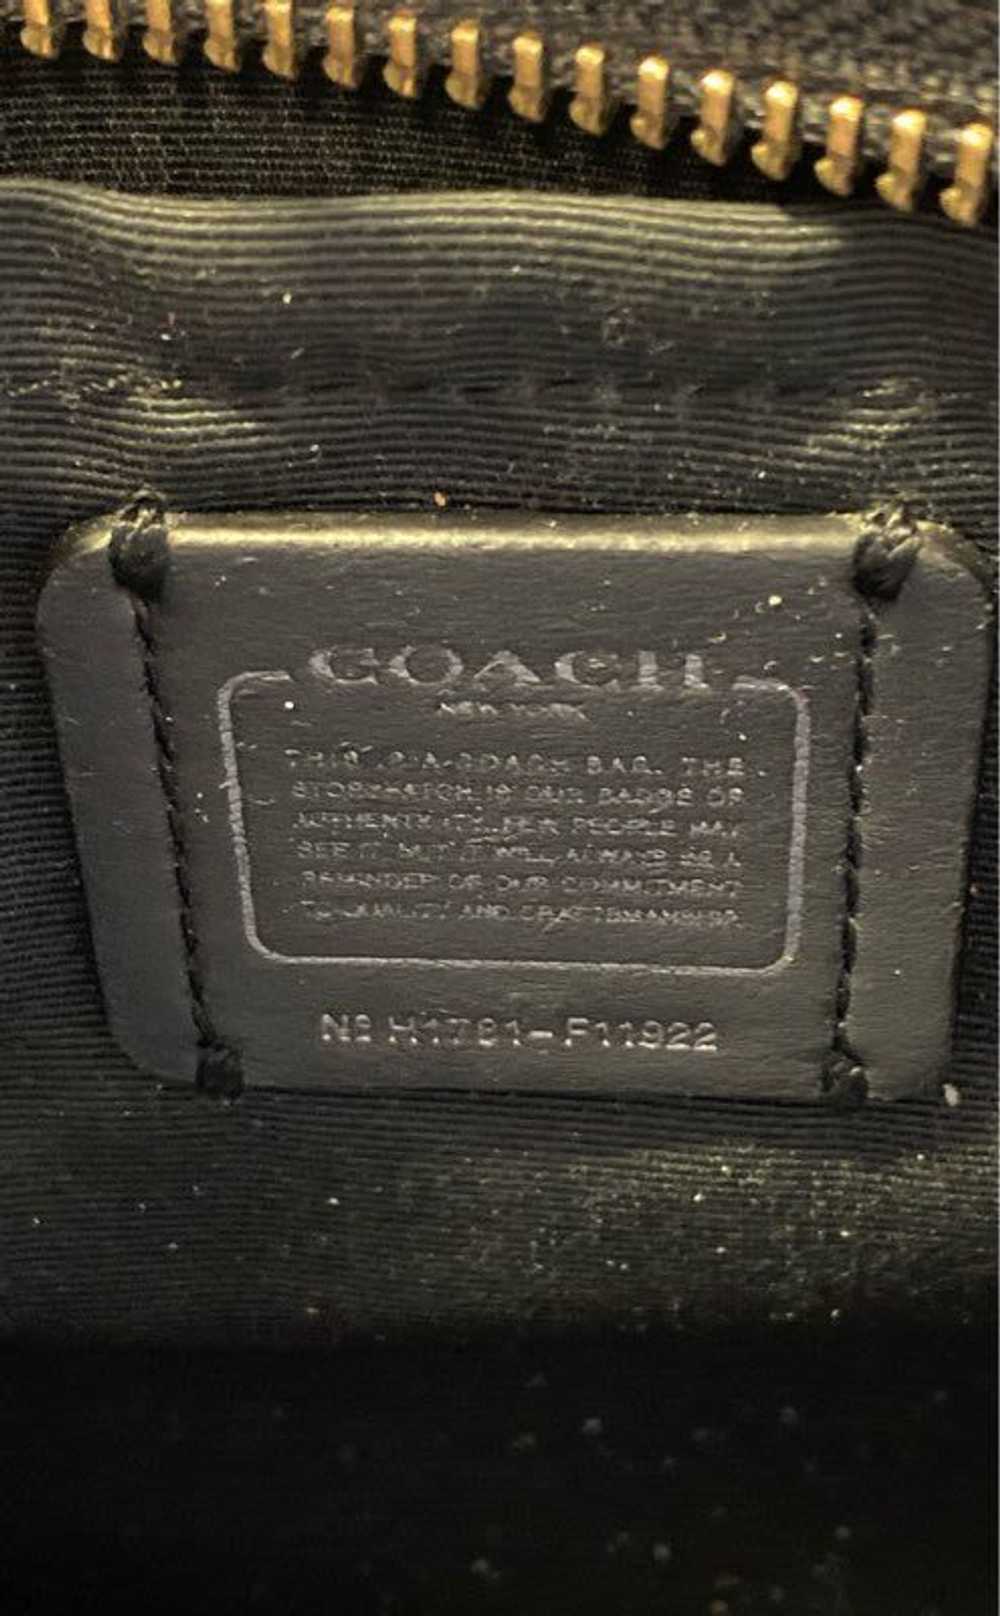 Coach Leather Mini Studded Quilted Satchel Black - image 5